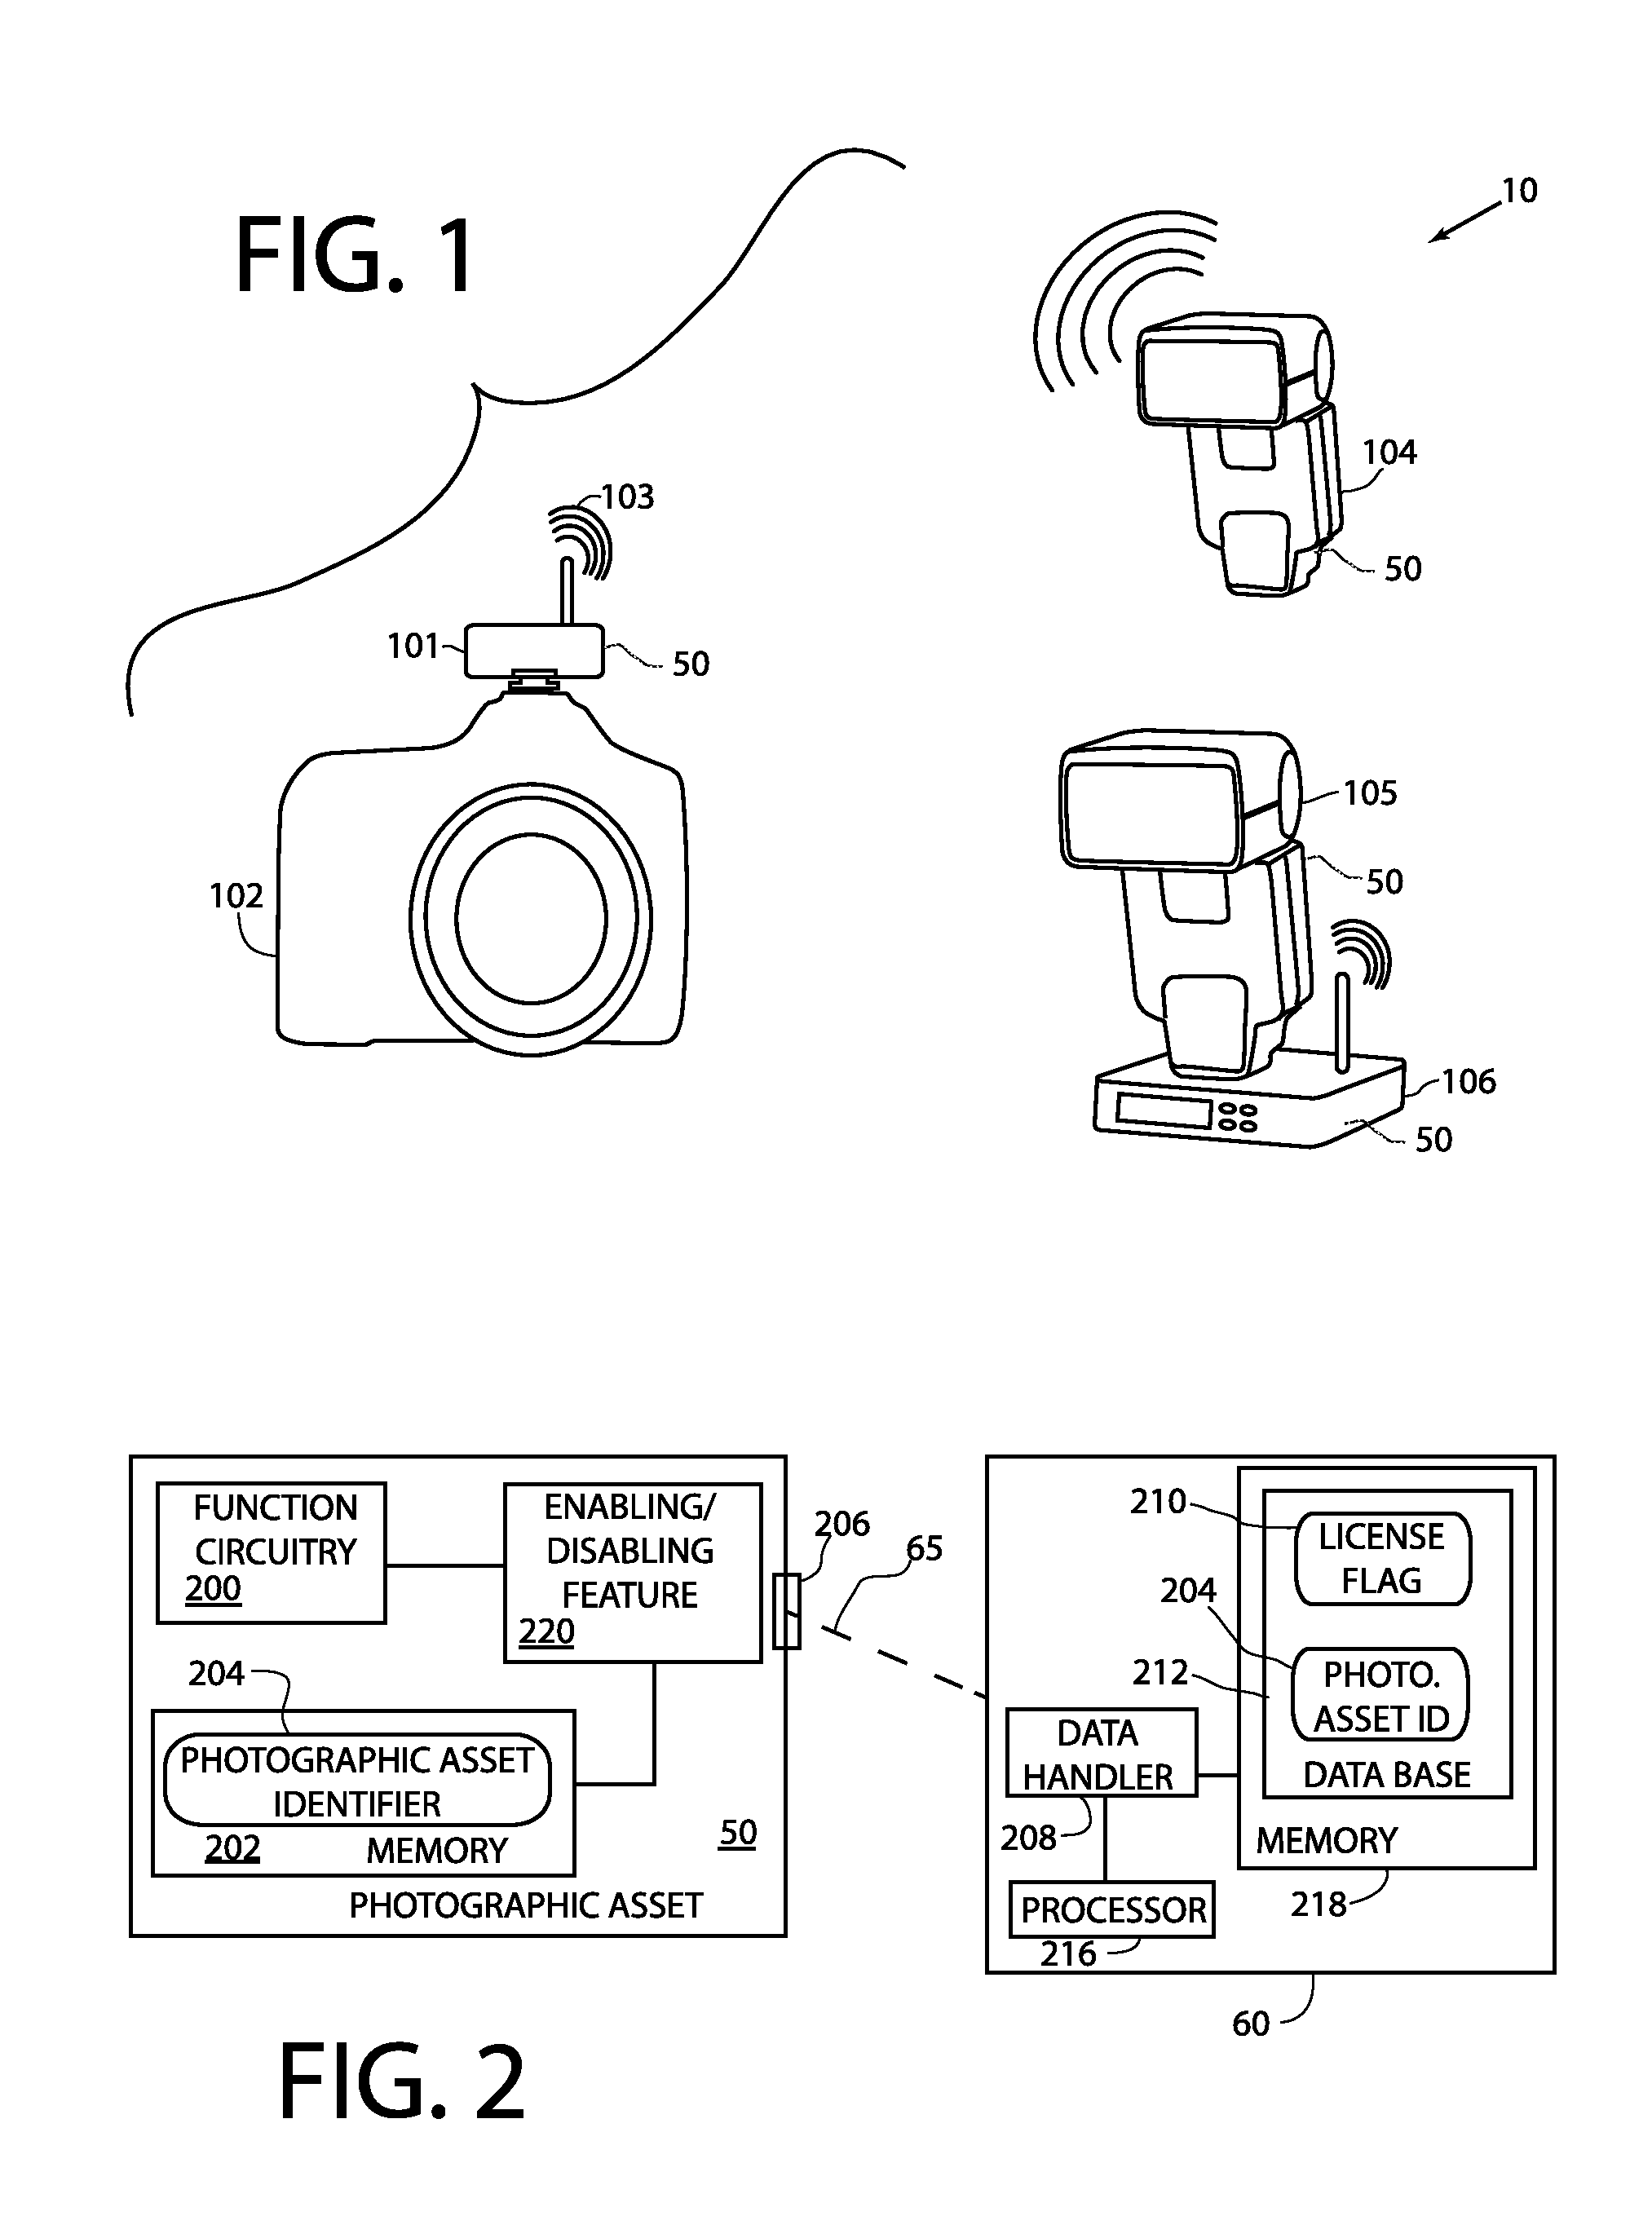 Database licensing and customer service system for wireless camera flash systems